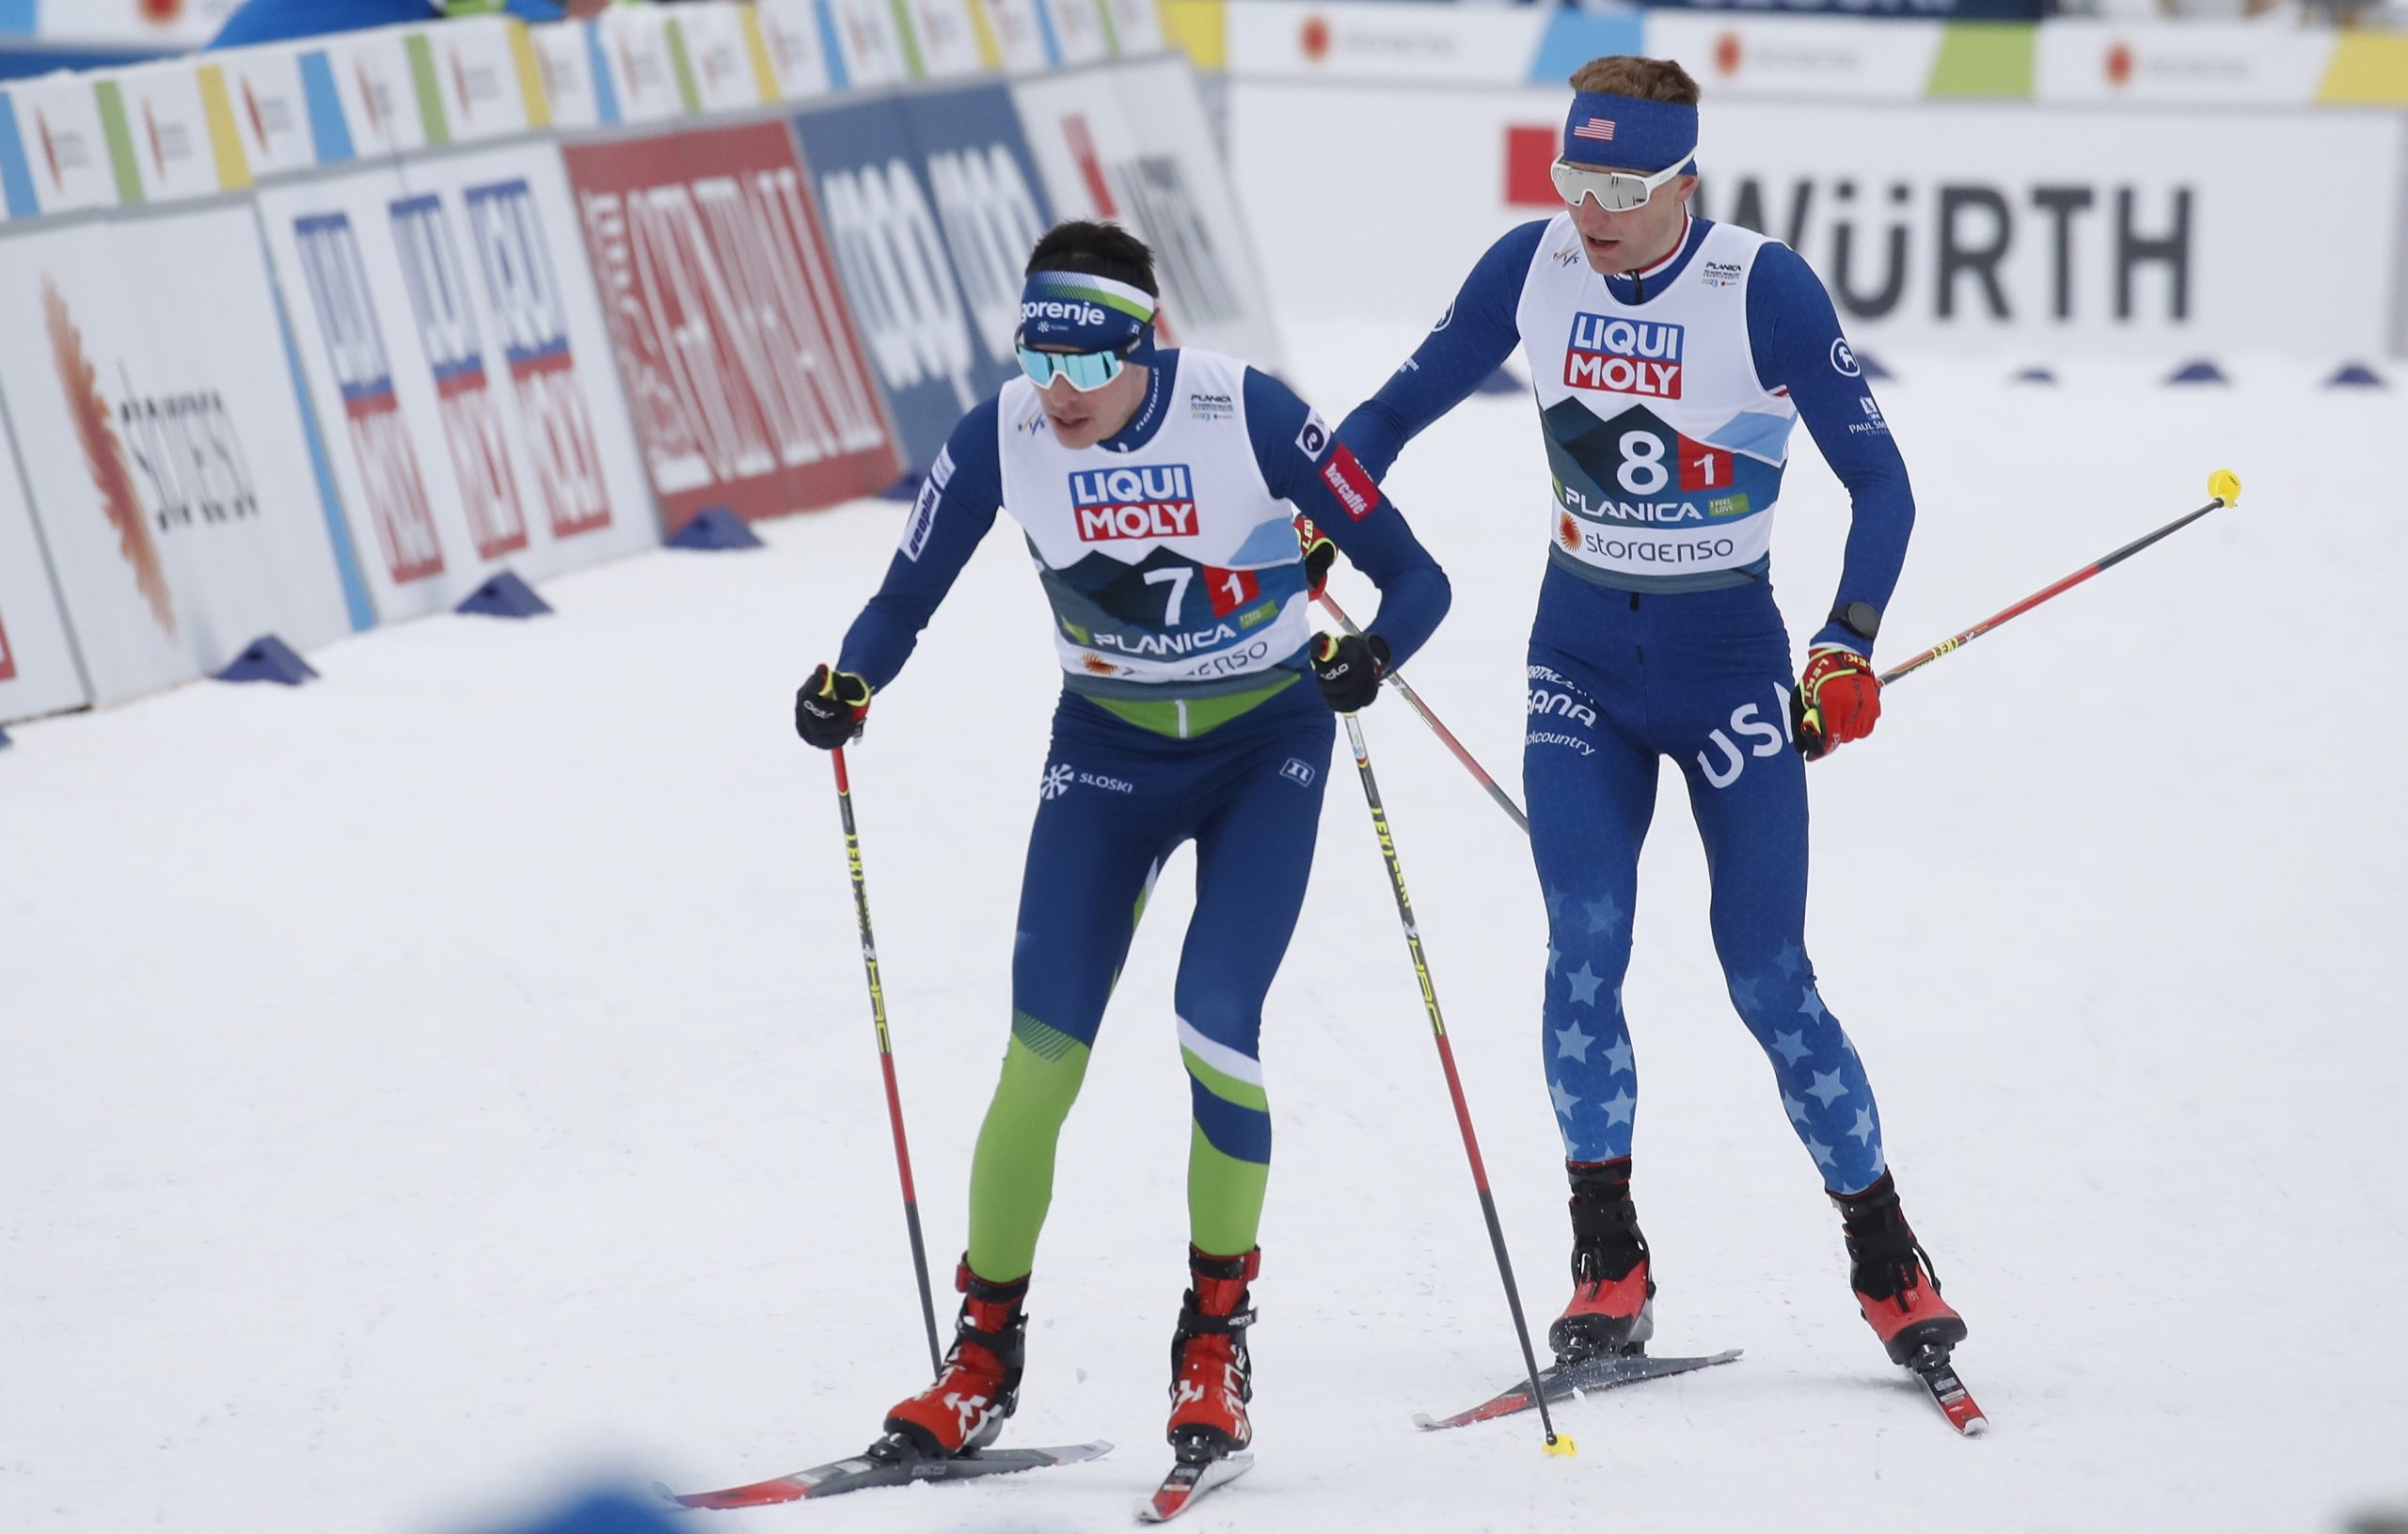 epa10492297 Ida Marie Hagen (C) of Norway and Jenny Nowak of Germany (R)  in action during the Nordic Combined Mixed Team Gundersen Normal Hill competition round at the FIS Nordic Skiing World Championships in Planica, Slovenia, 26 February 2023.  EPA/ANTONIO BAT